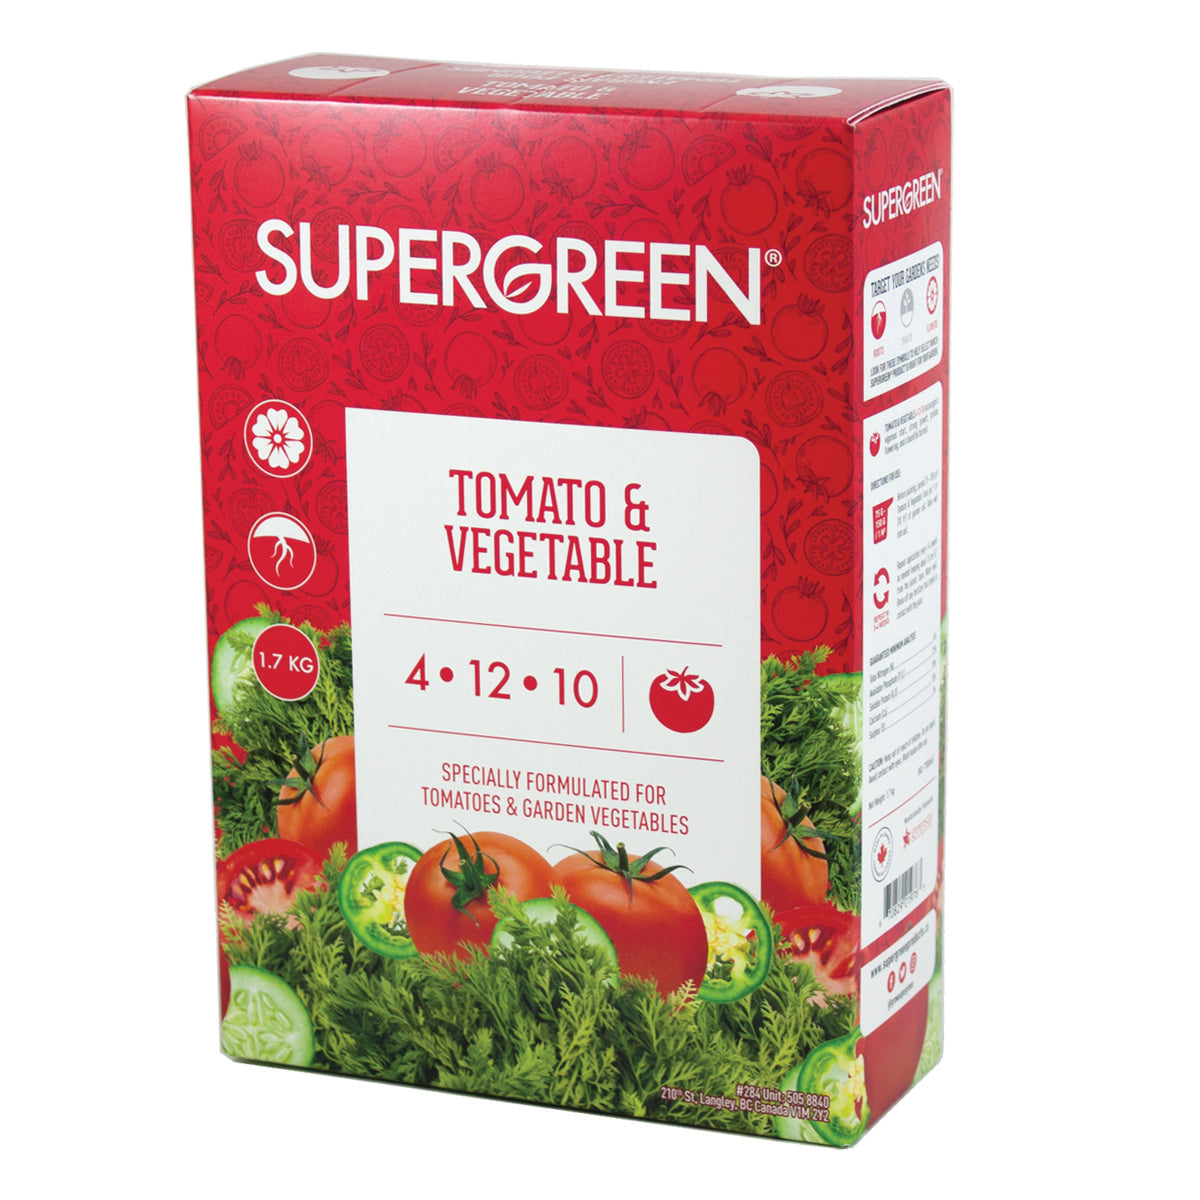 Supergreen Tomato and Vegetable 4-12-10 1.7kg